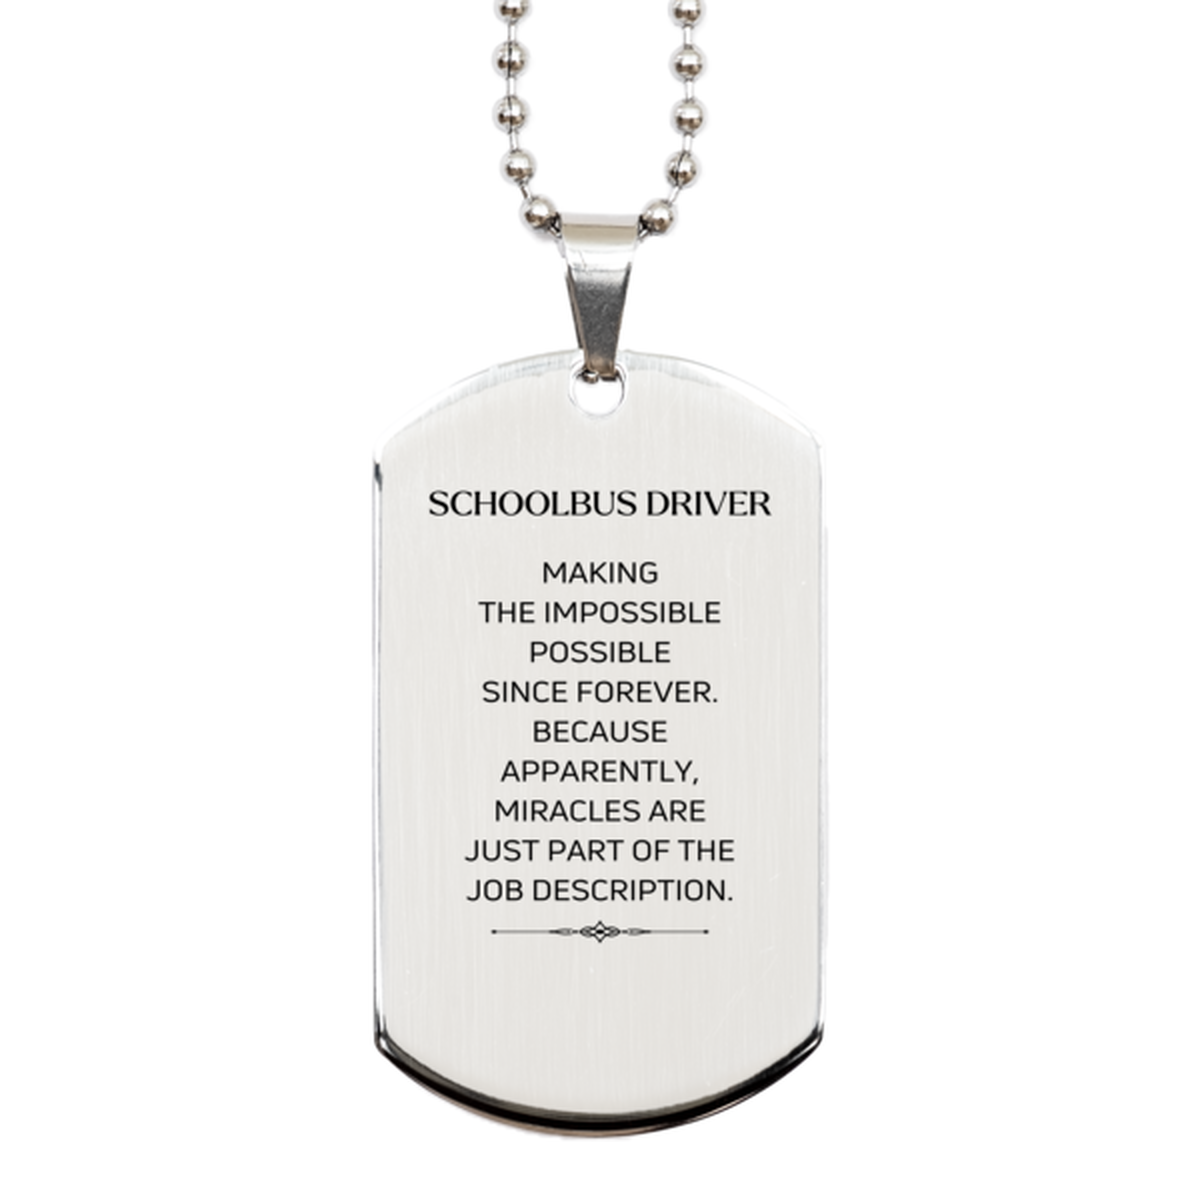 Funny Schoolbus Driver Gifts, Miracles are just part of the job description, Inspirational Birthday Silver Dog Tag For Schoolbus Driver, Men, Women, Coworkers, Friends, Boss